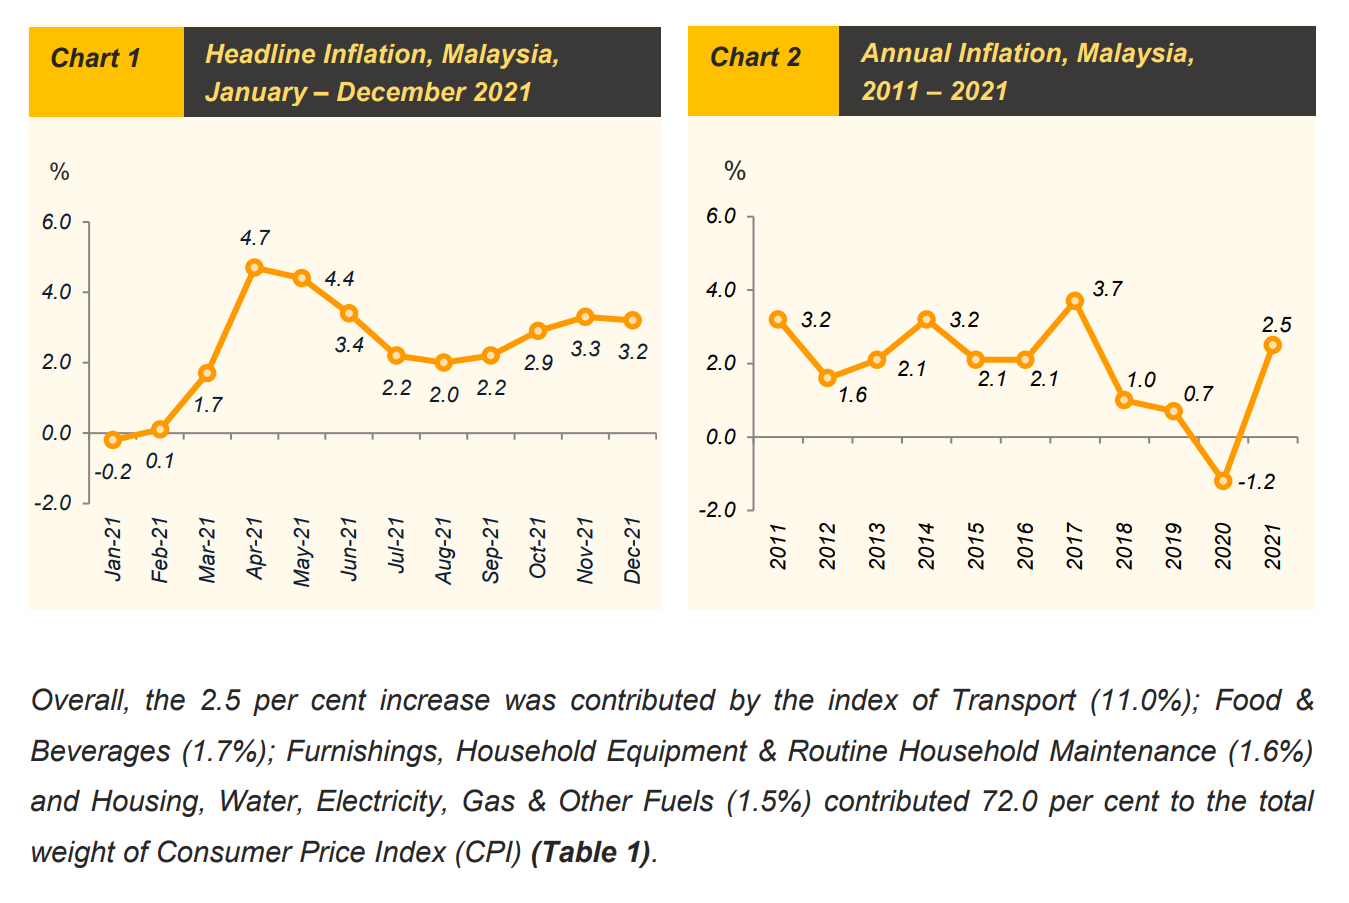 Malaysia's inflation rate in 2021